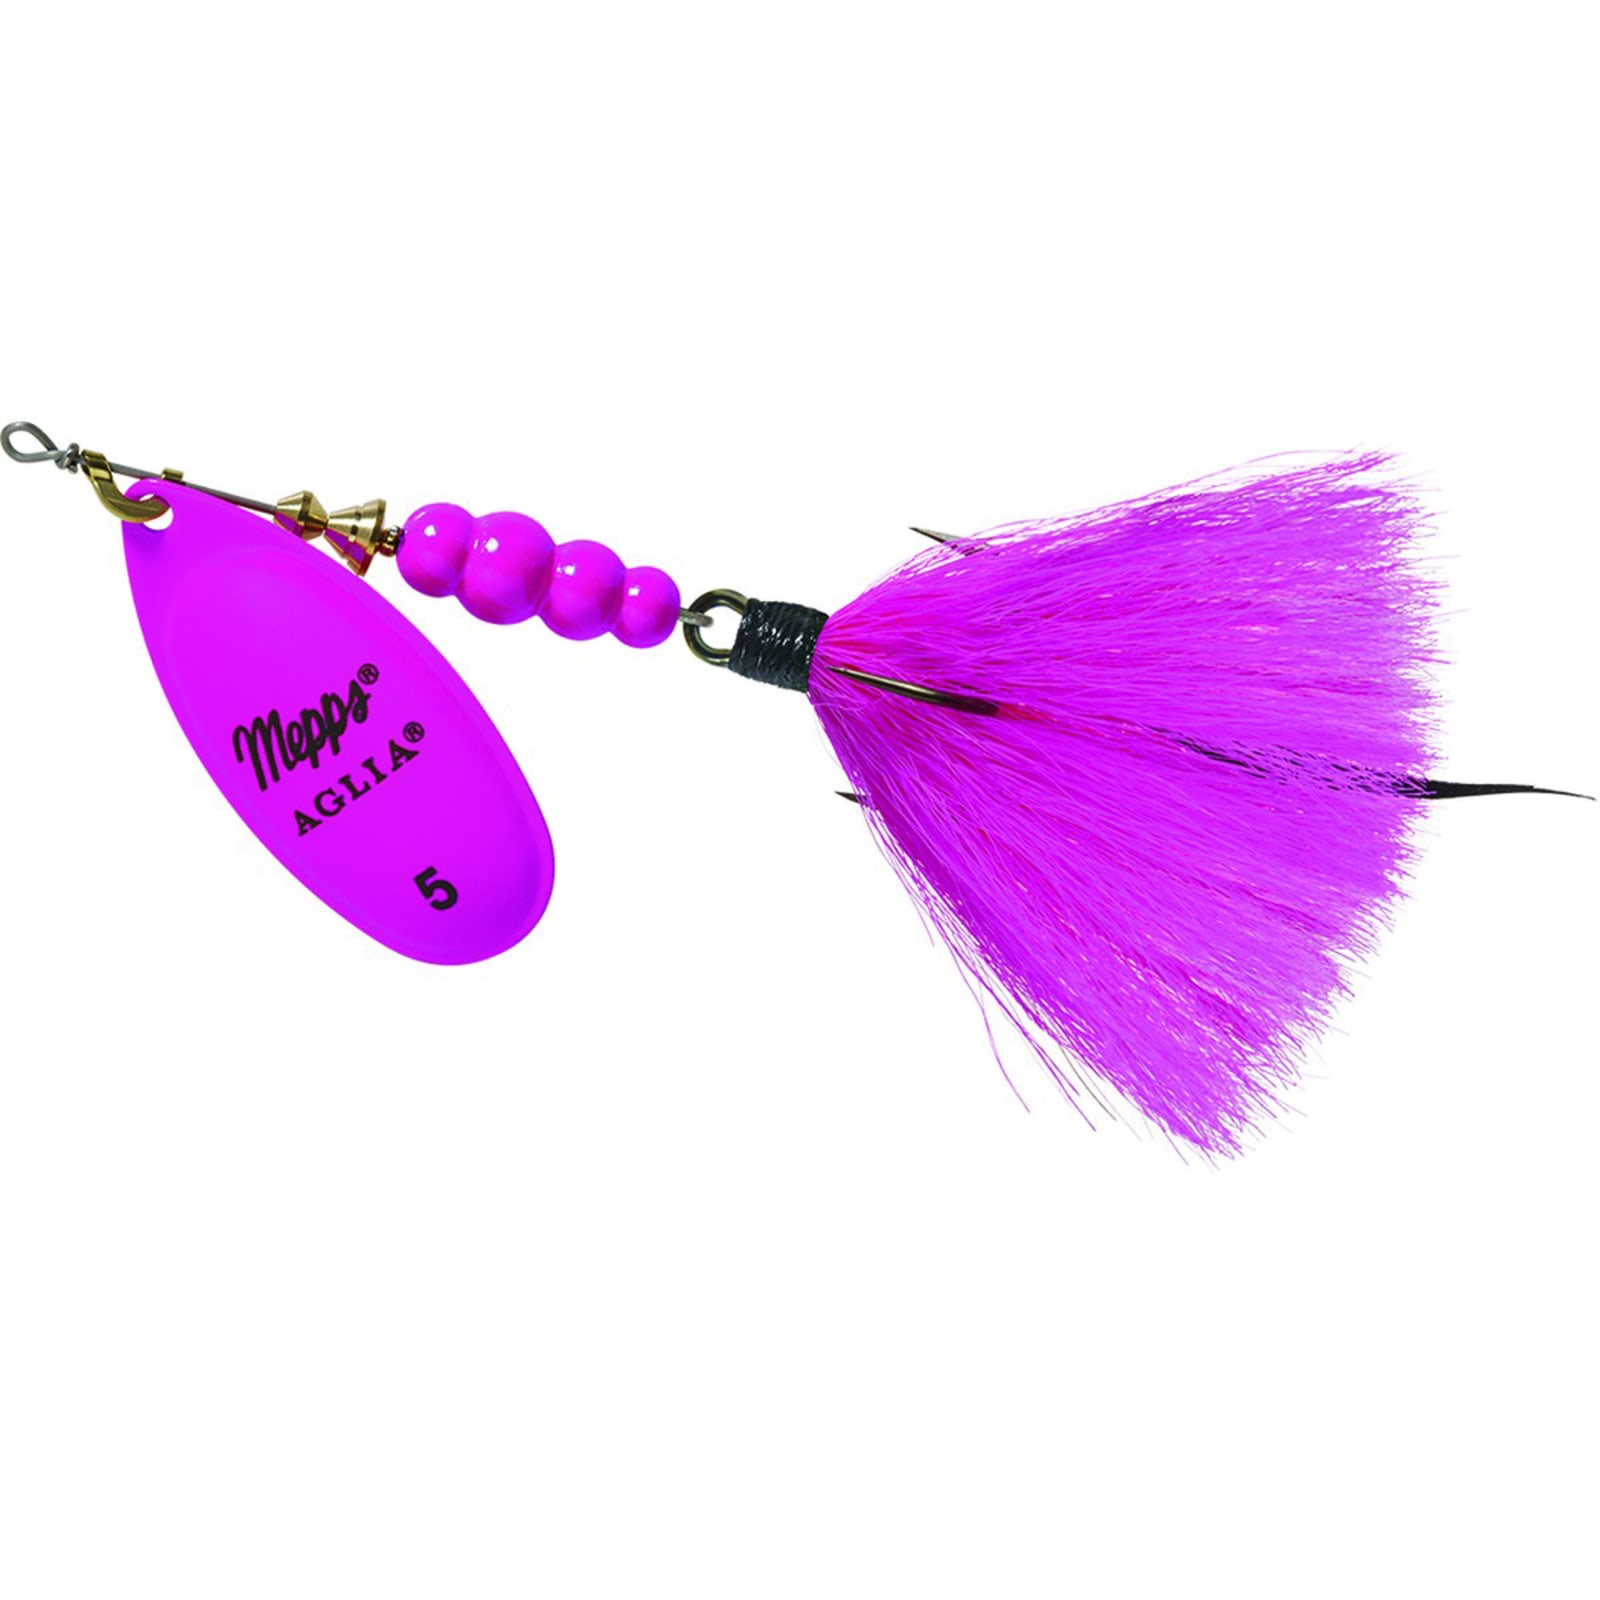 Aglia 1/2 oz Chartreuse Hot Pink Dressed Treble Hook Spinner by